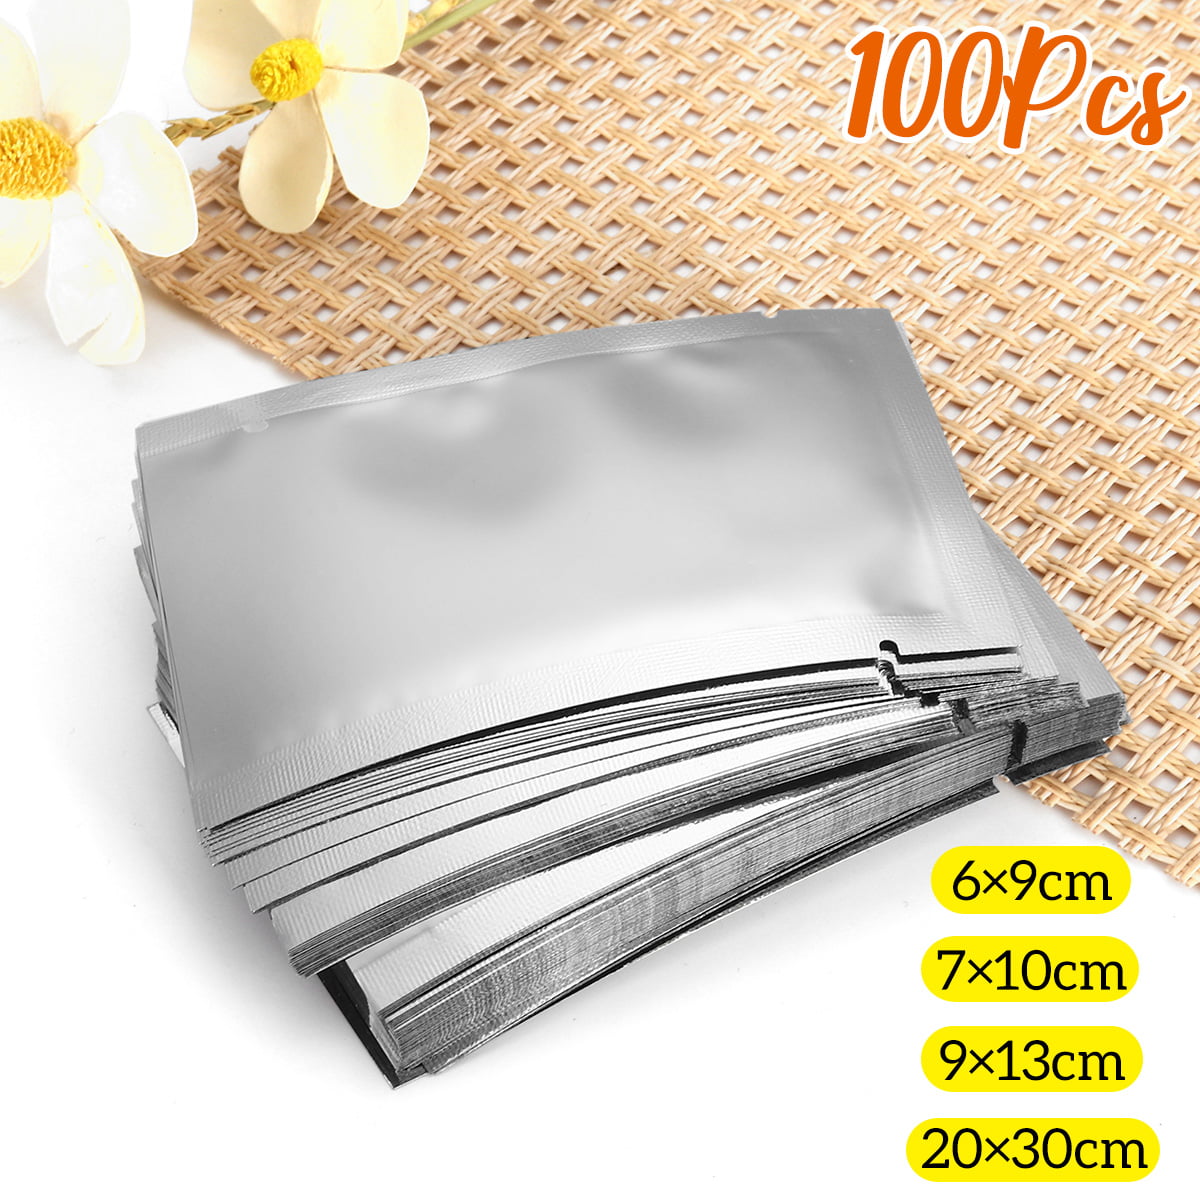 Mylar Heat Seal Vacuum Aluminum Foil Bags Smell Proof Glossy Colorful Food Packs 